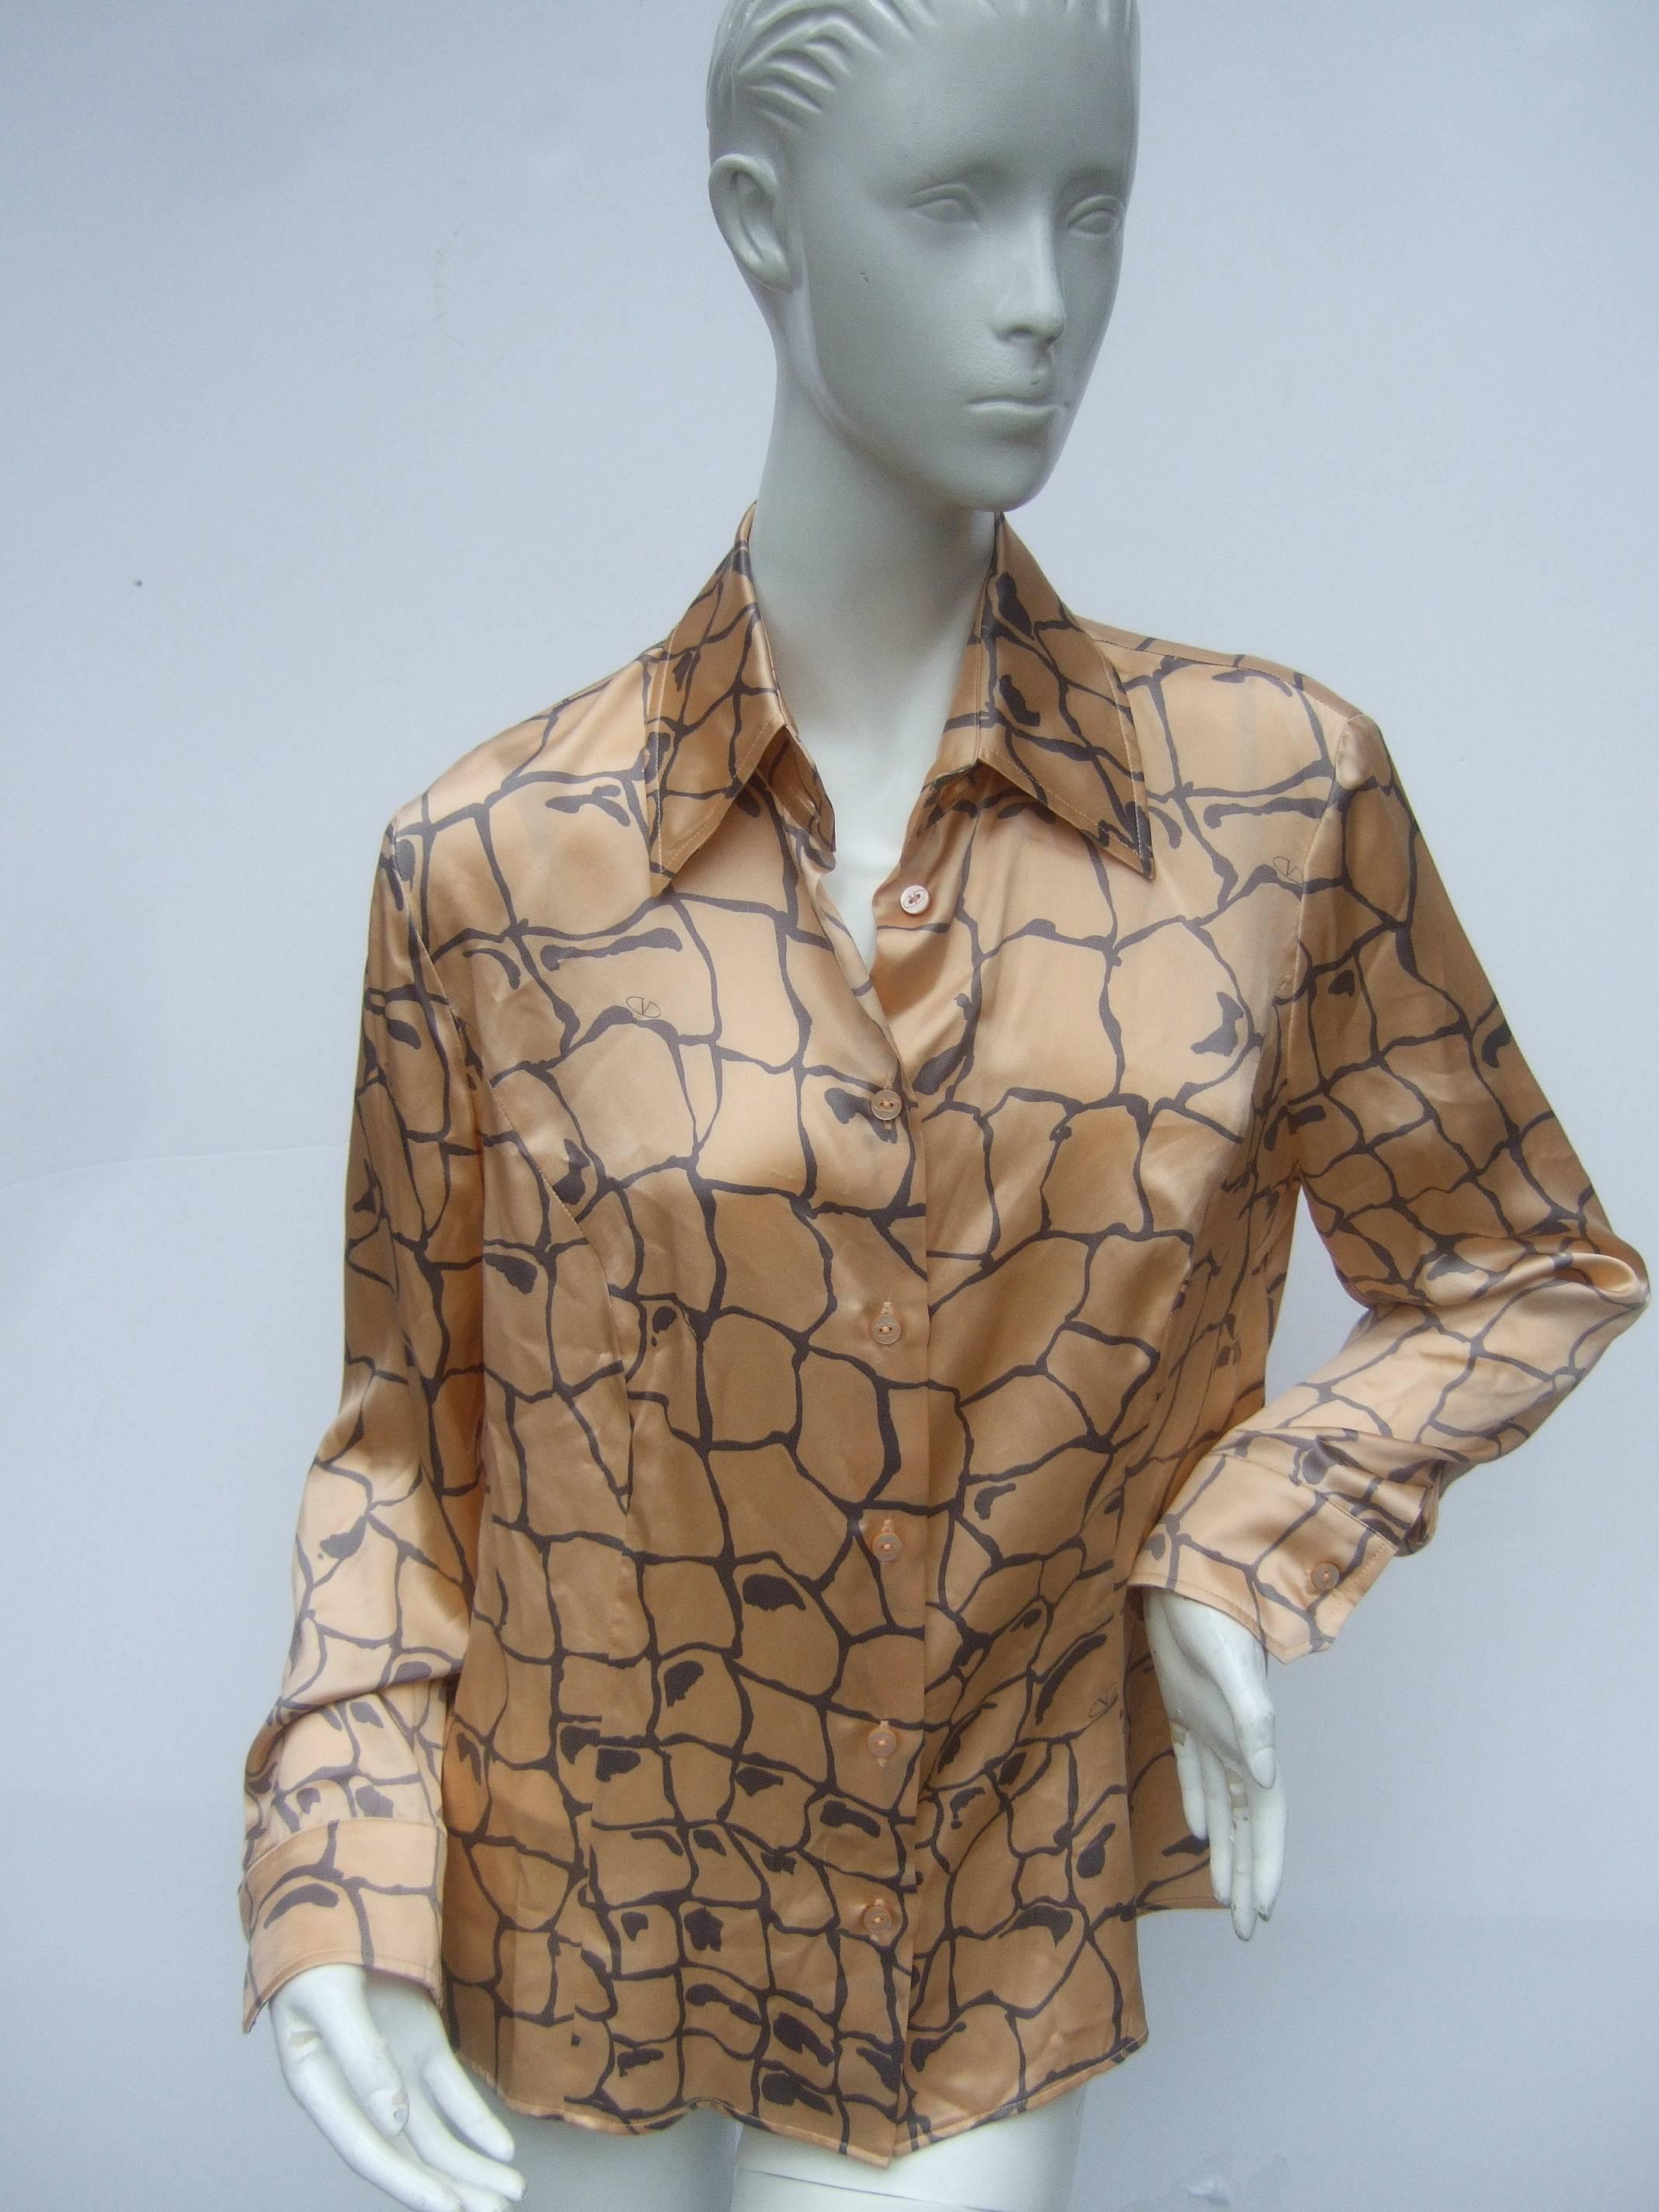 Valentino Italy Silk Charmeuse Peach and Gray Print Blouse US Size 12  en vente 2